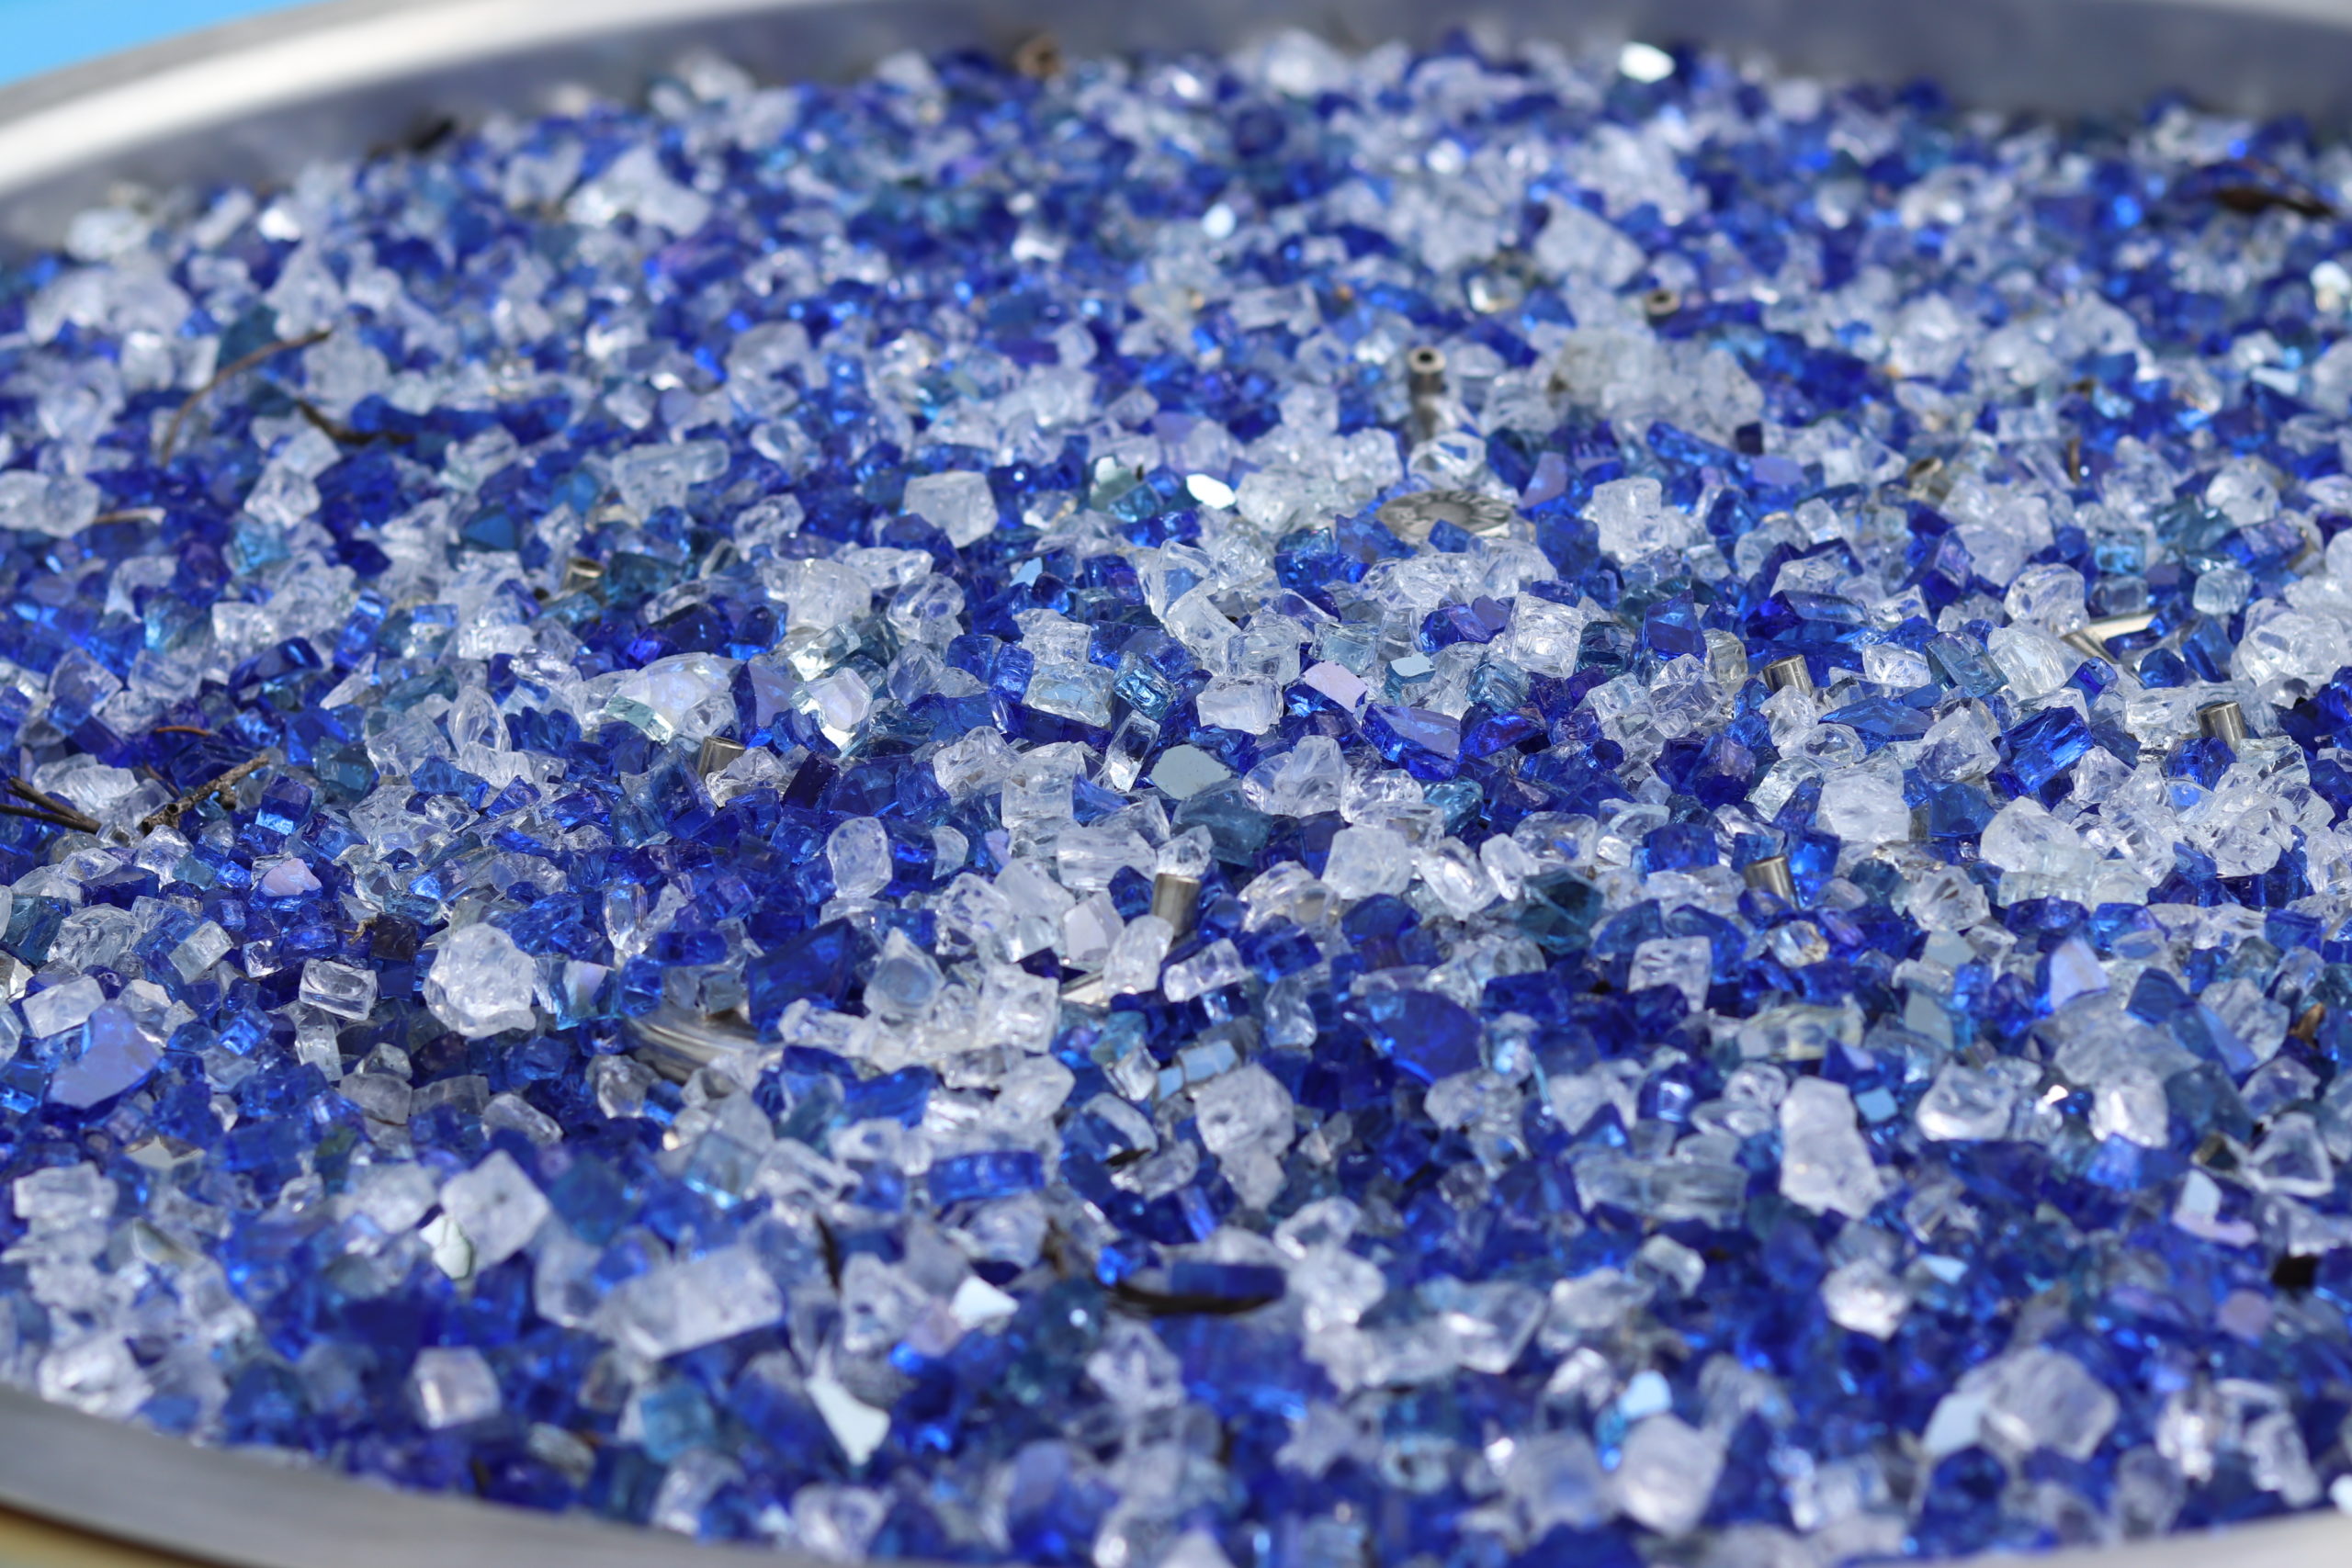 Blue and white fire glass in an aluminum bowl